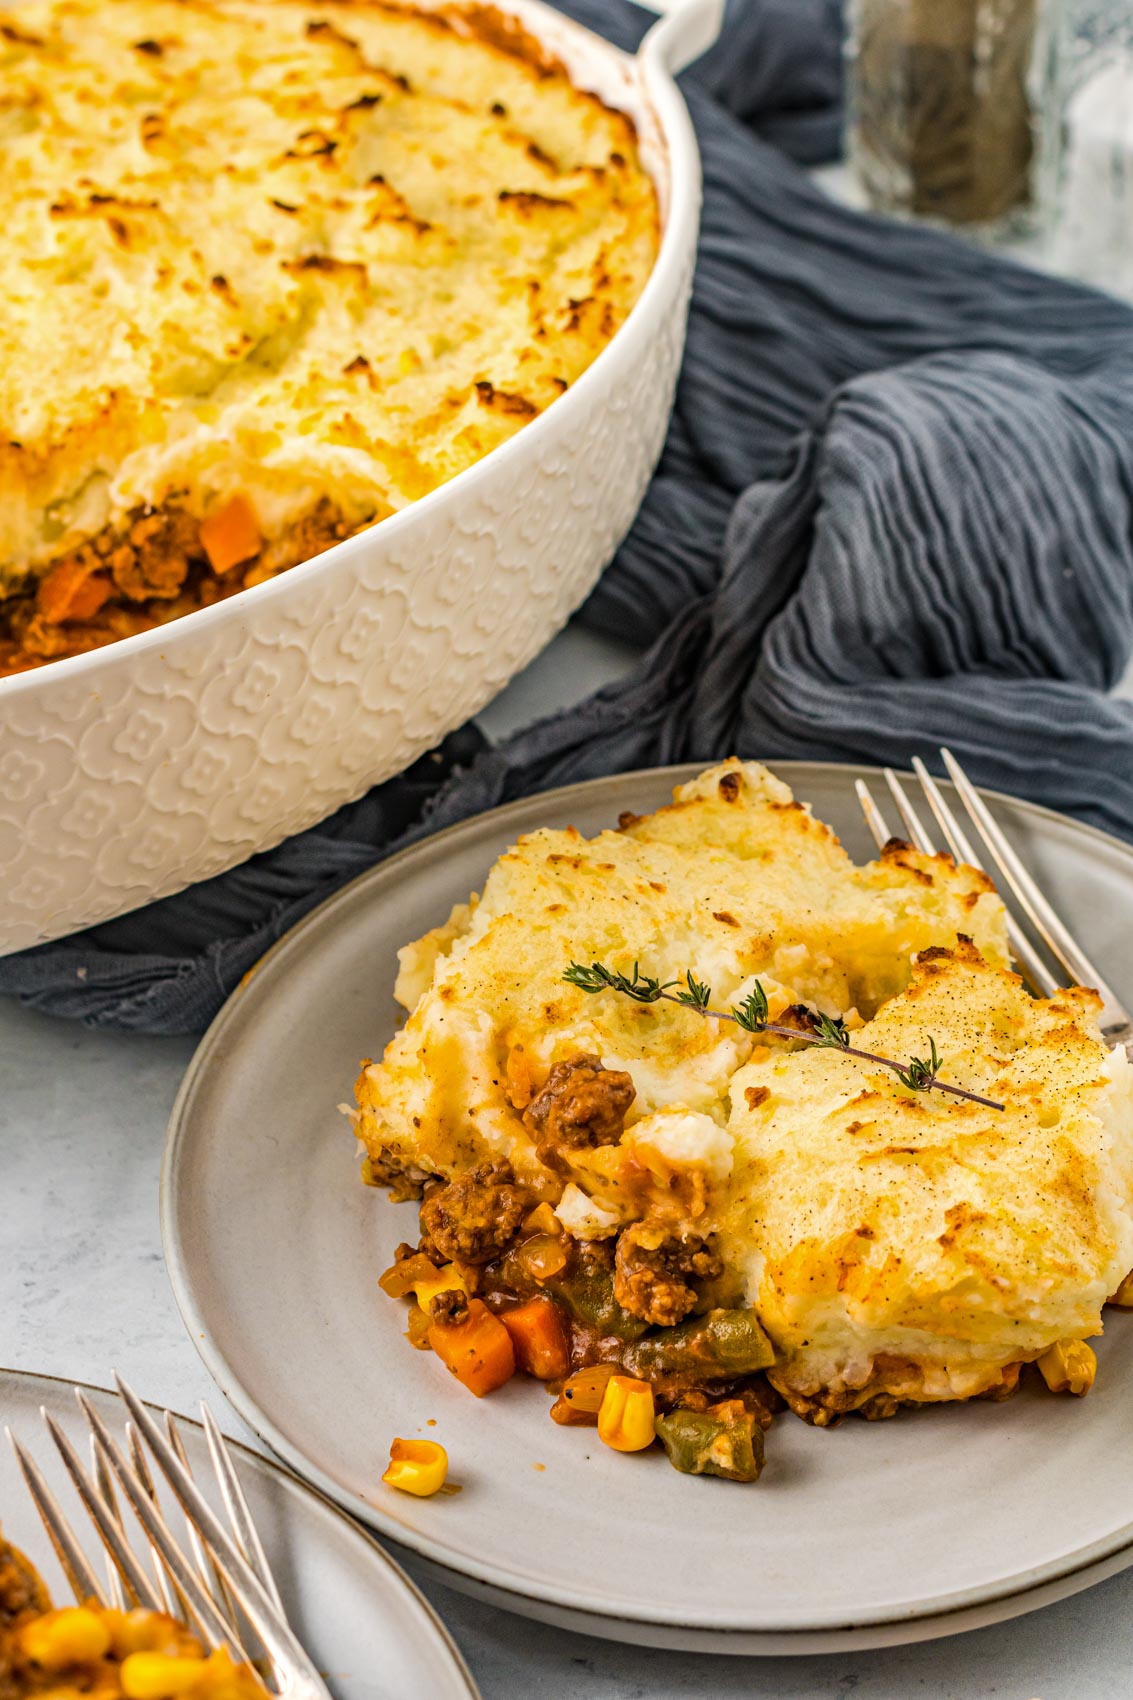 shepherds pie on a plate next to a casserole dish